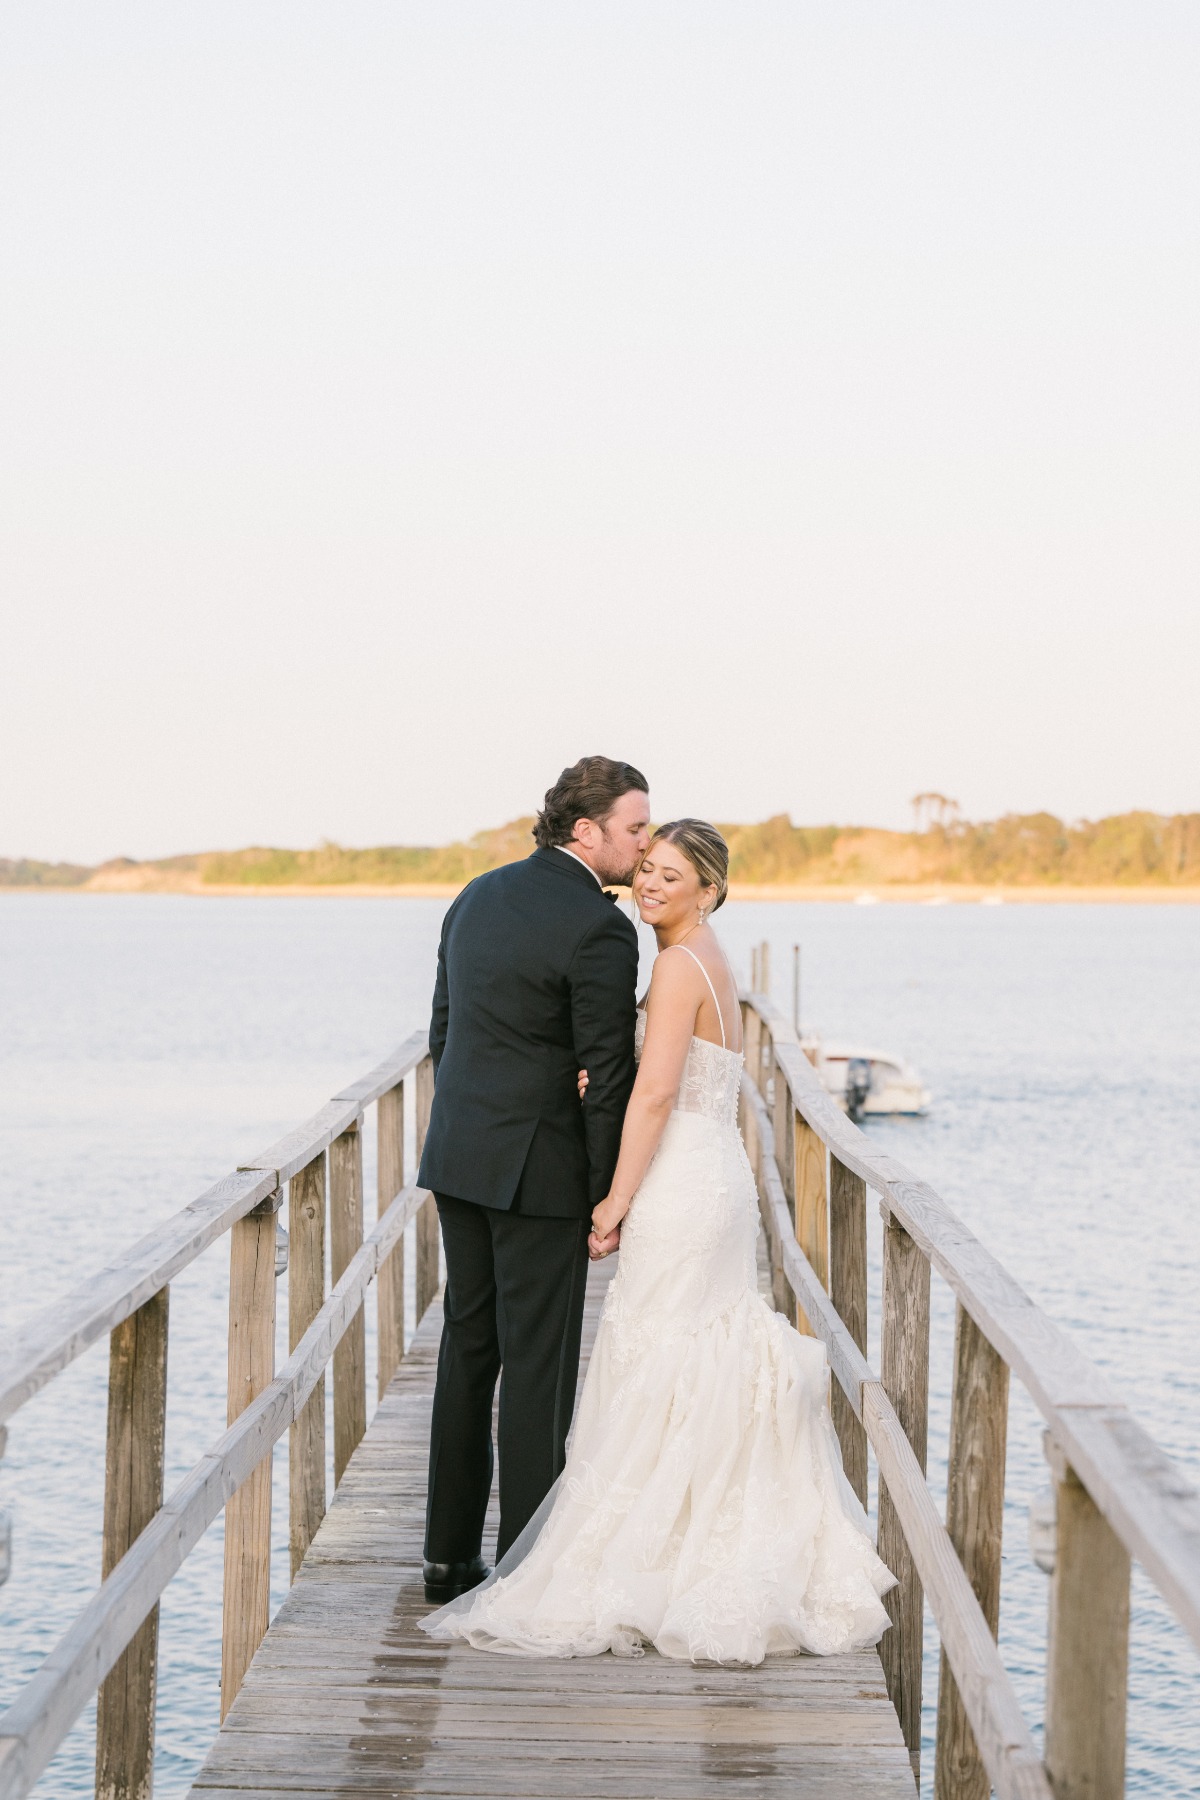 Cape Cod bride and groom sunset portraits on wooden dock